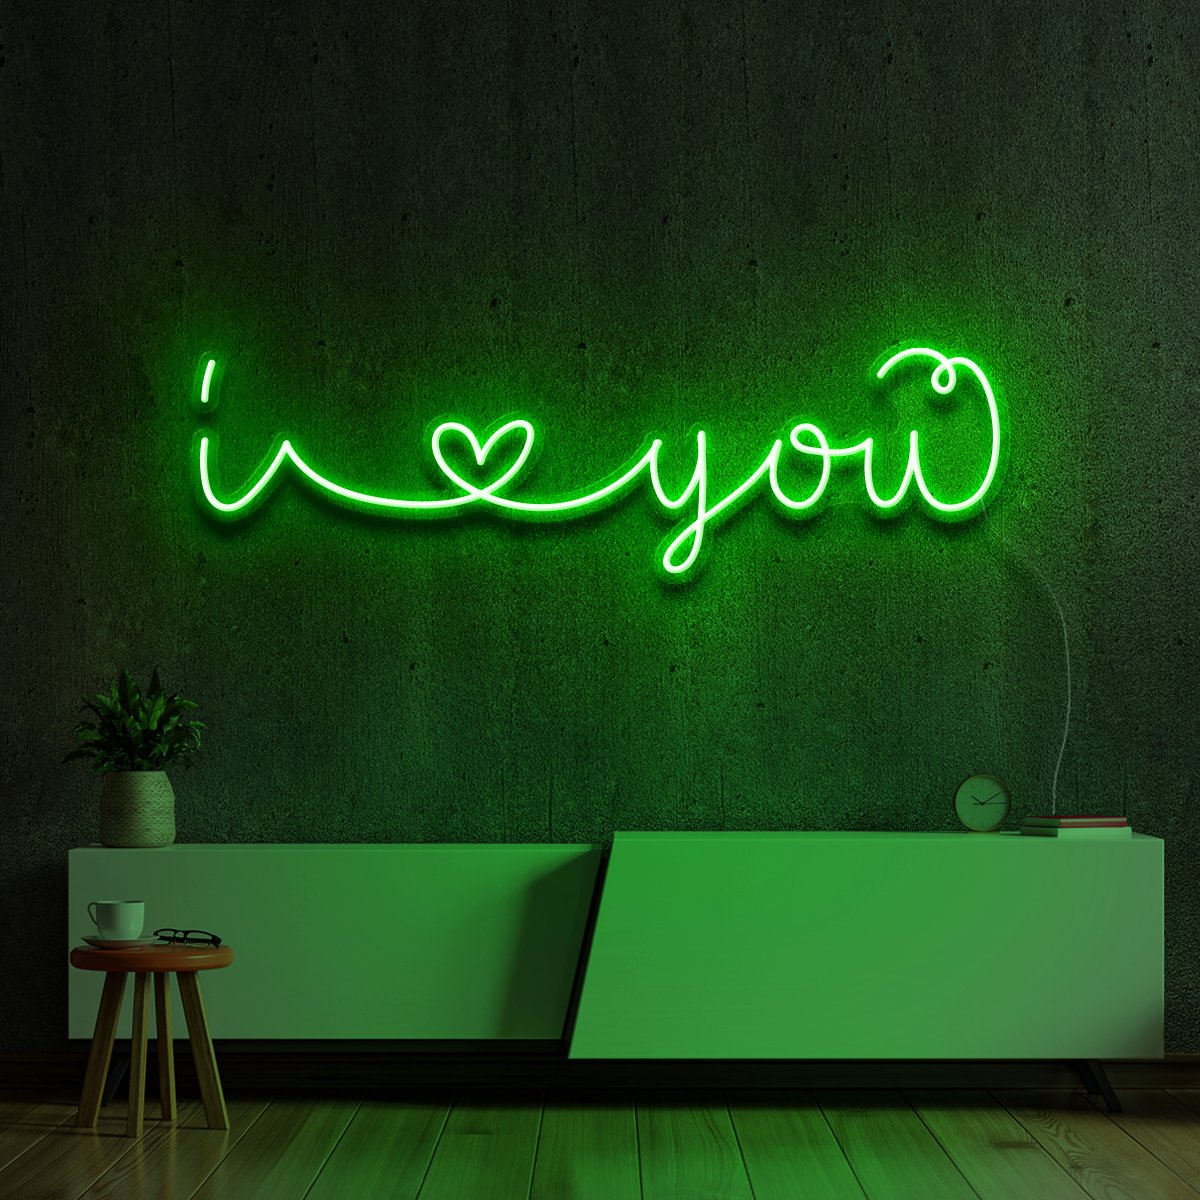 "I Love You" Neon Sign 60cm (2ft) / Green / LED Neon by Neon Icons